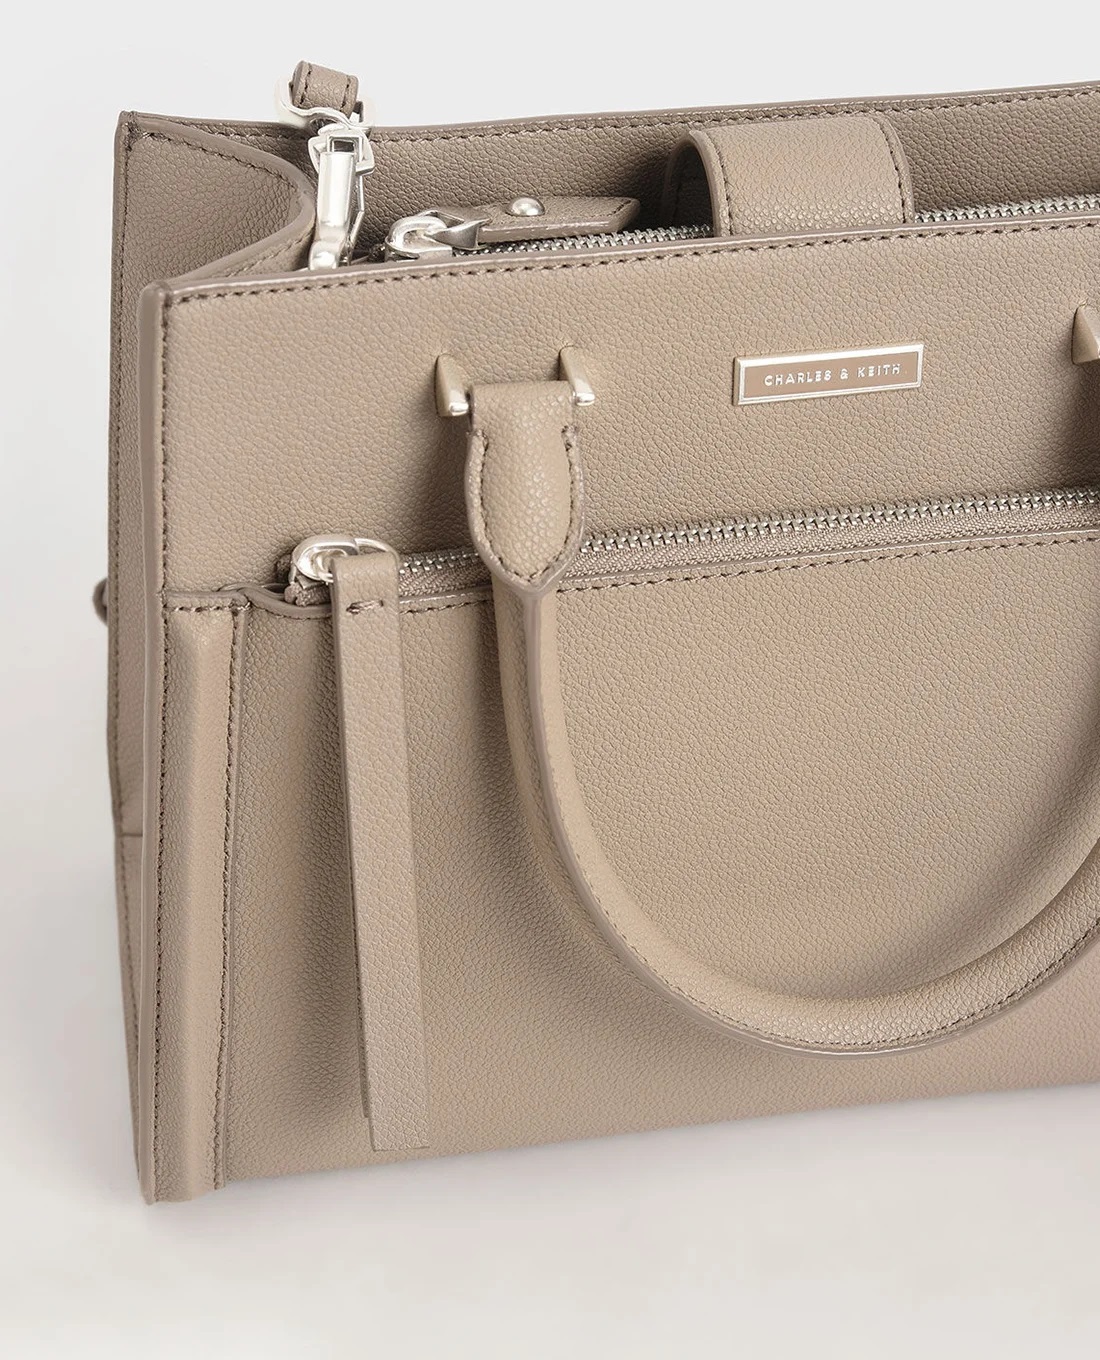 TÚI XÁCH CHARLES KEITH DOUBLE HANDLE FRONT ZIP TOTE BAG 16